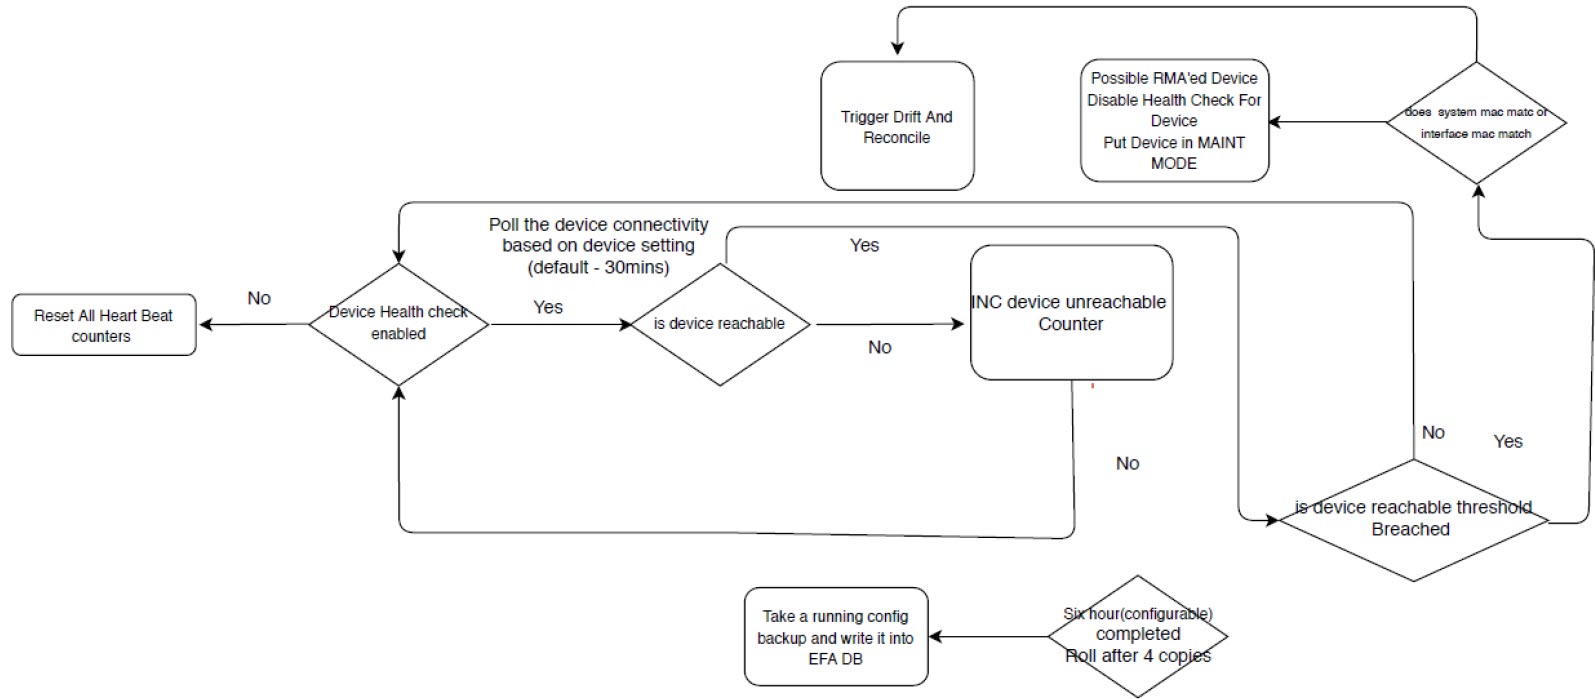 Flowchart that walks through drive and reconcile, RMA, device polling, and running config backup 